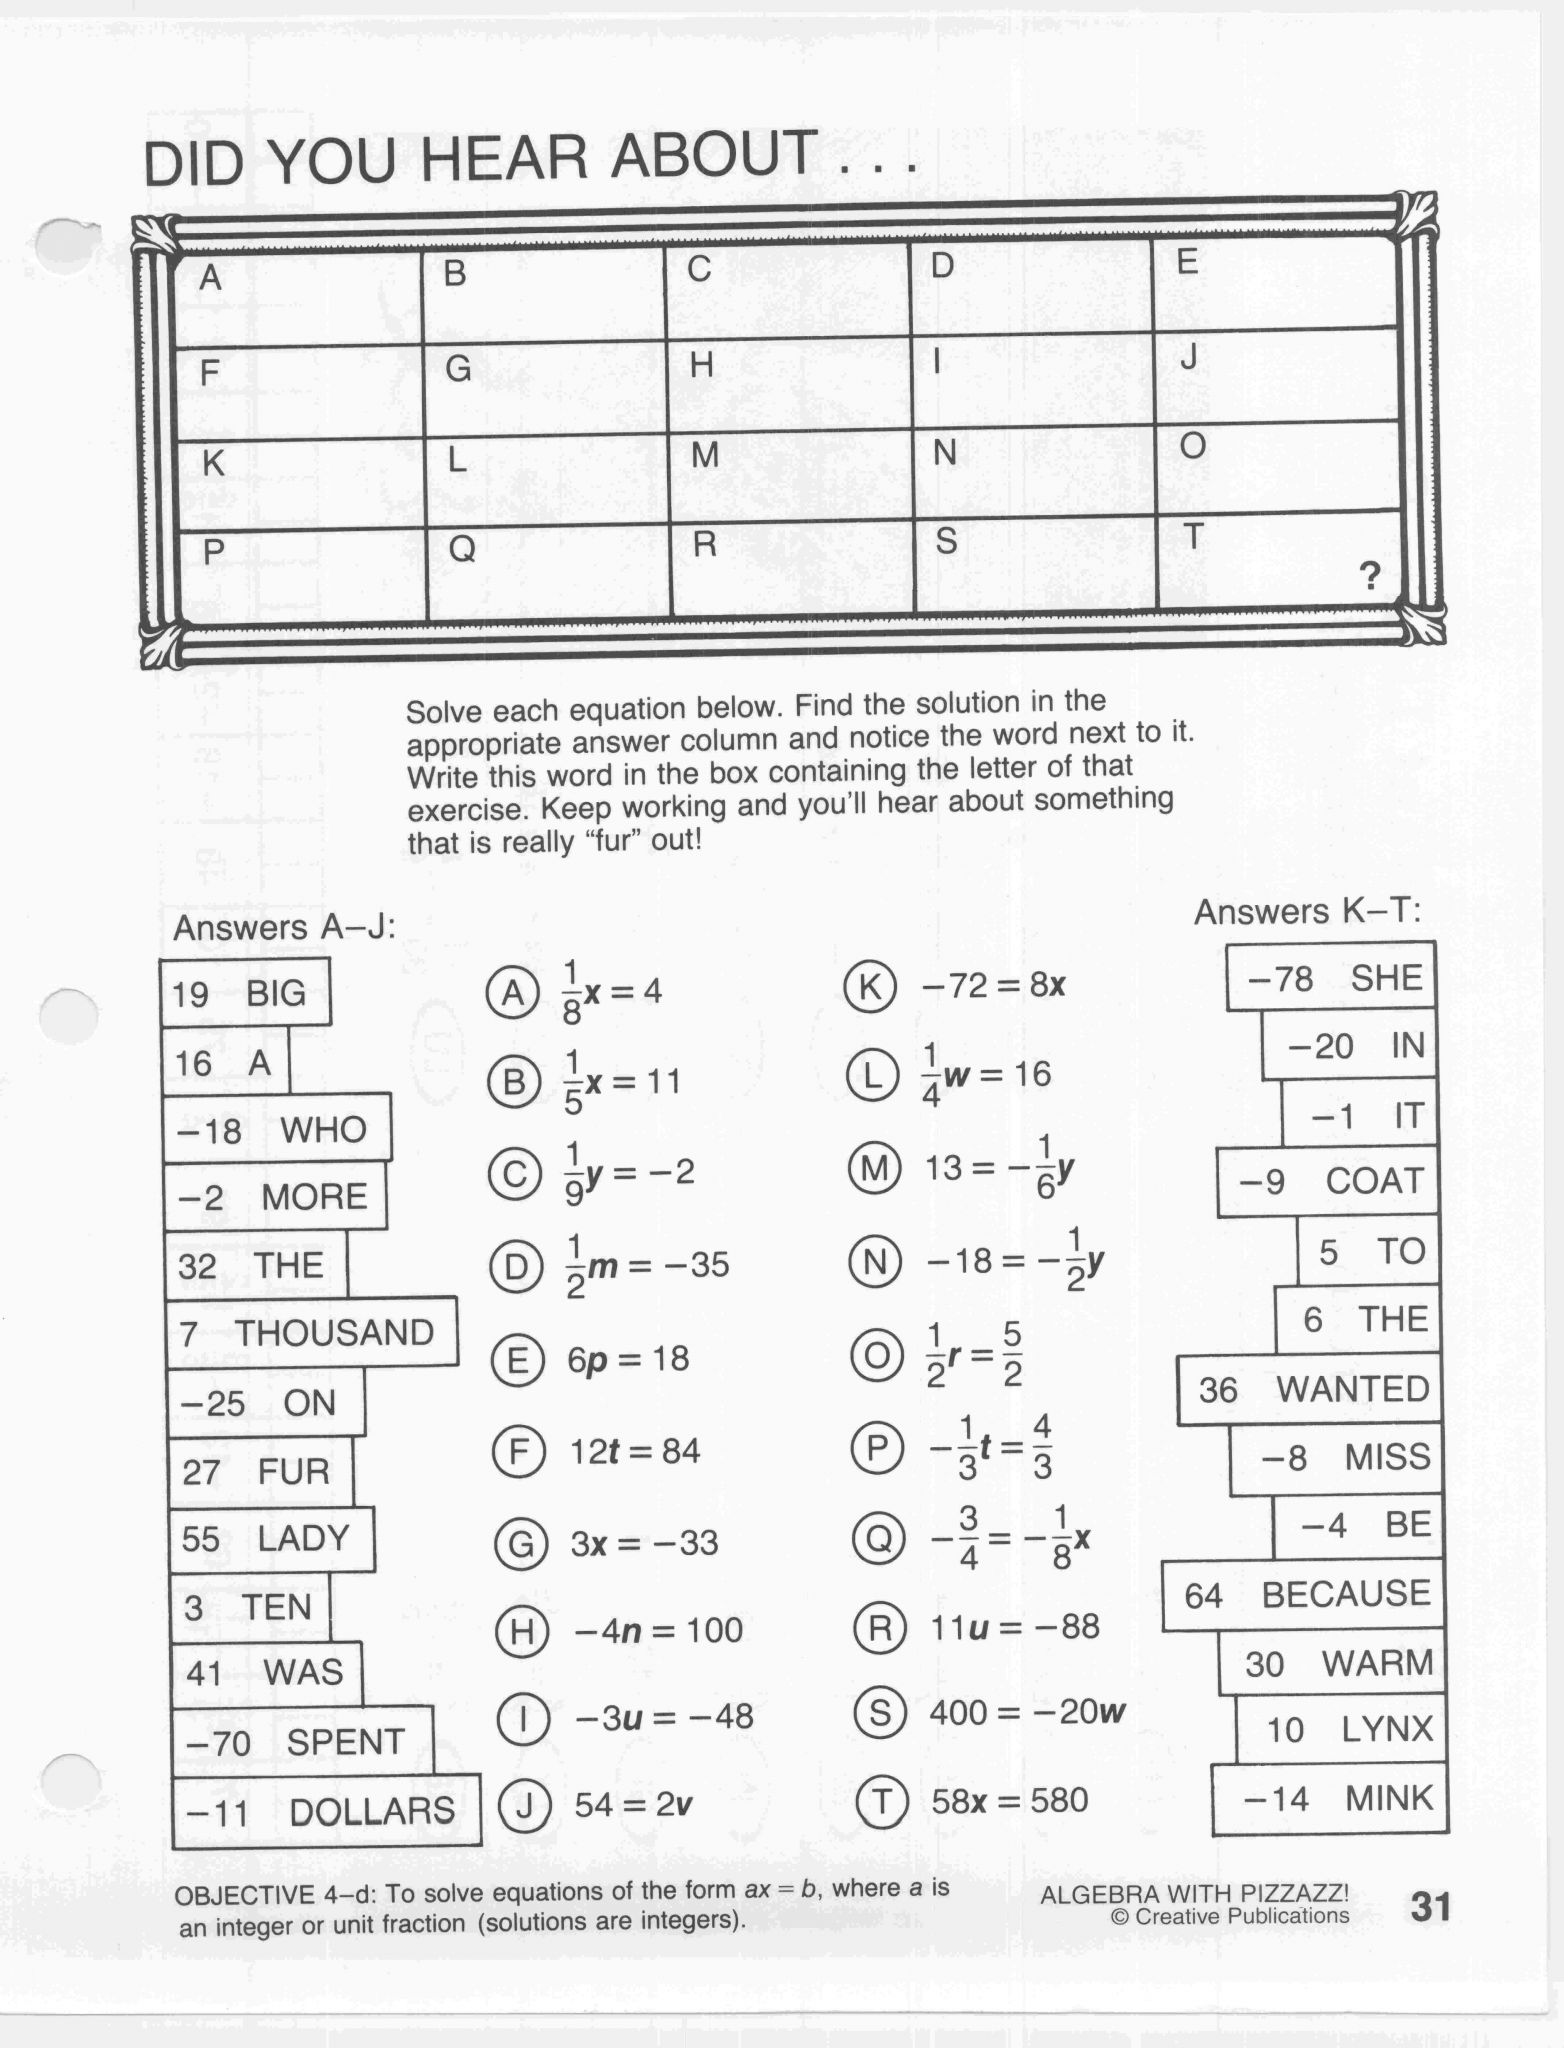 Did You Hear About Math Worksheet Algebra with Pizzazz Answers Along with Moving Wordsazz Pre Algebra with Worksheets Answers Page Words